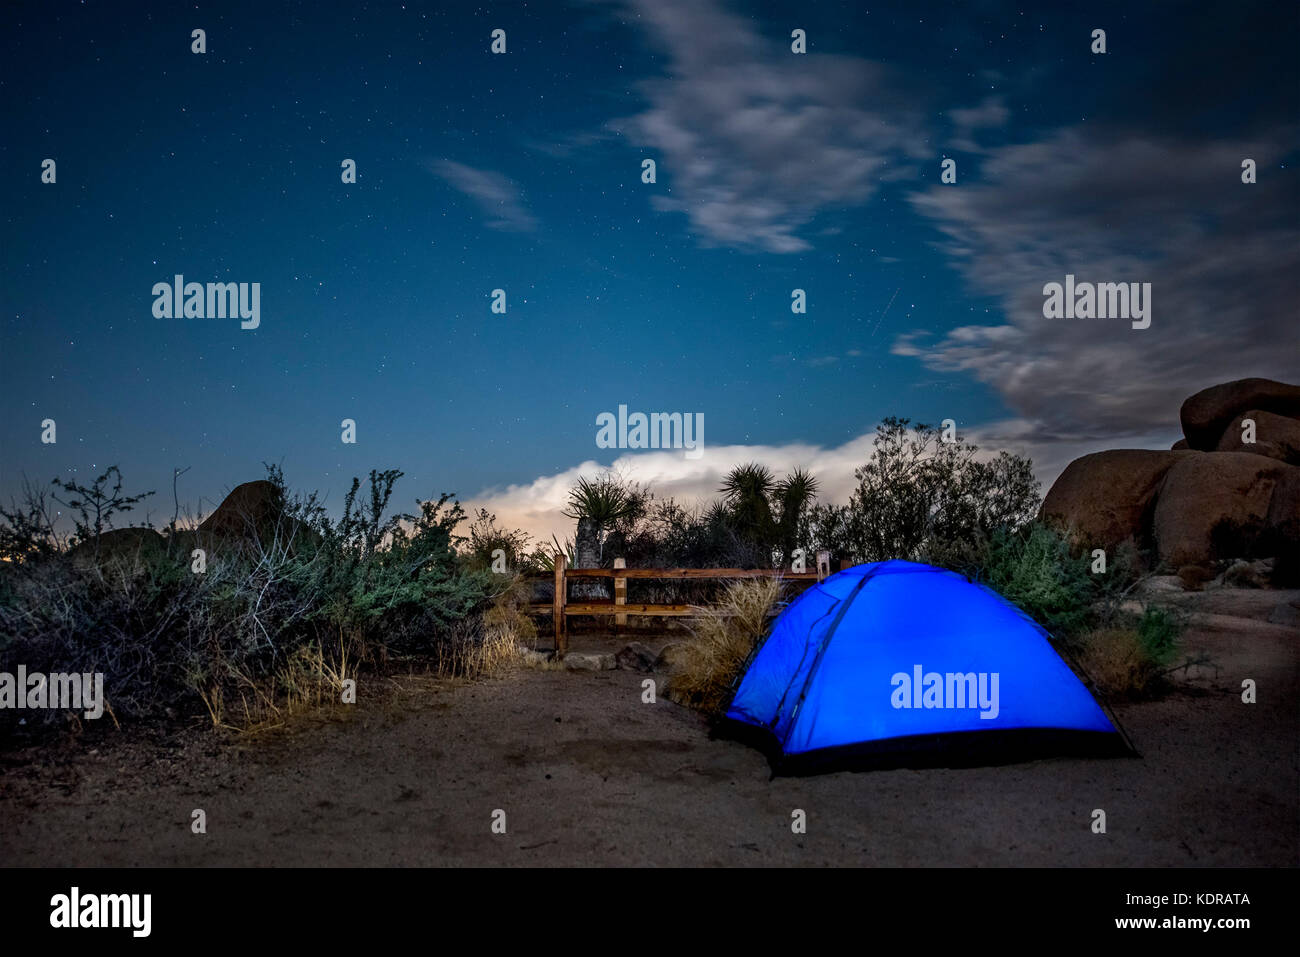 A campsite in the Mojave Desert shows a lighted blue tent as campers prepare to call it a night. Stock Photo